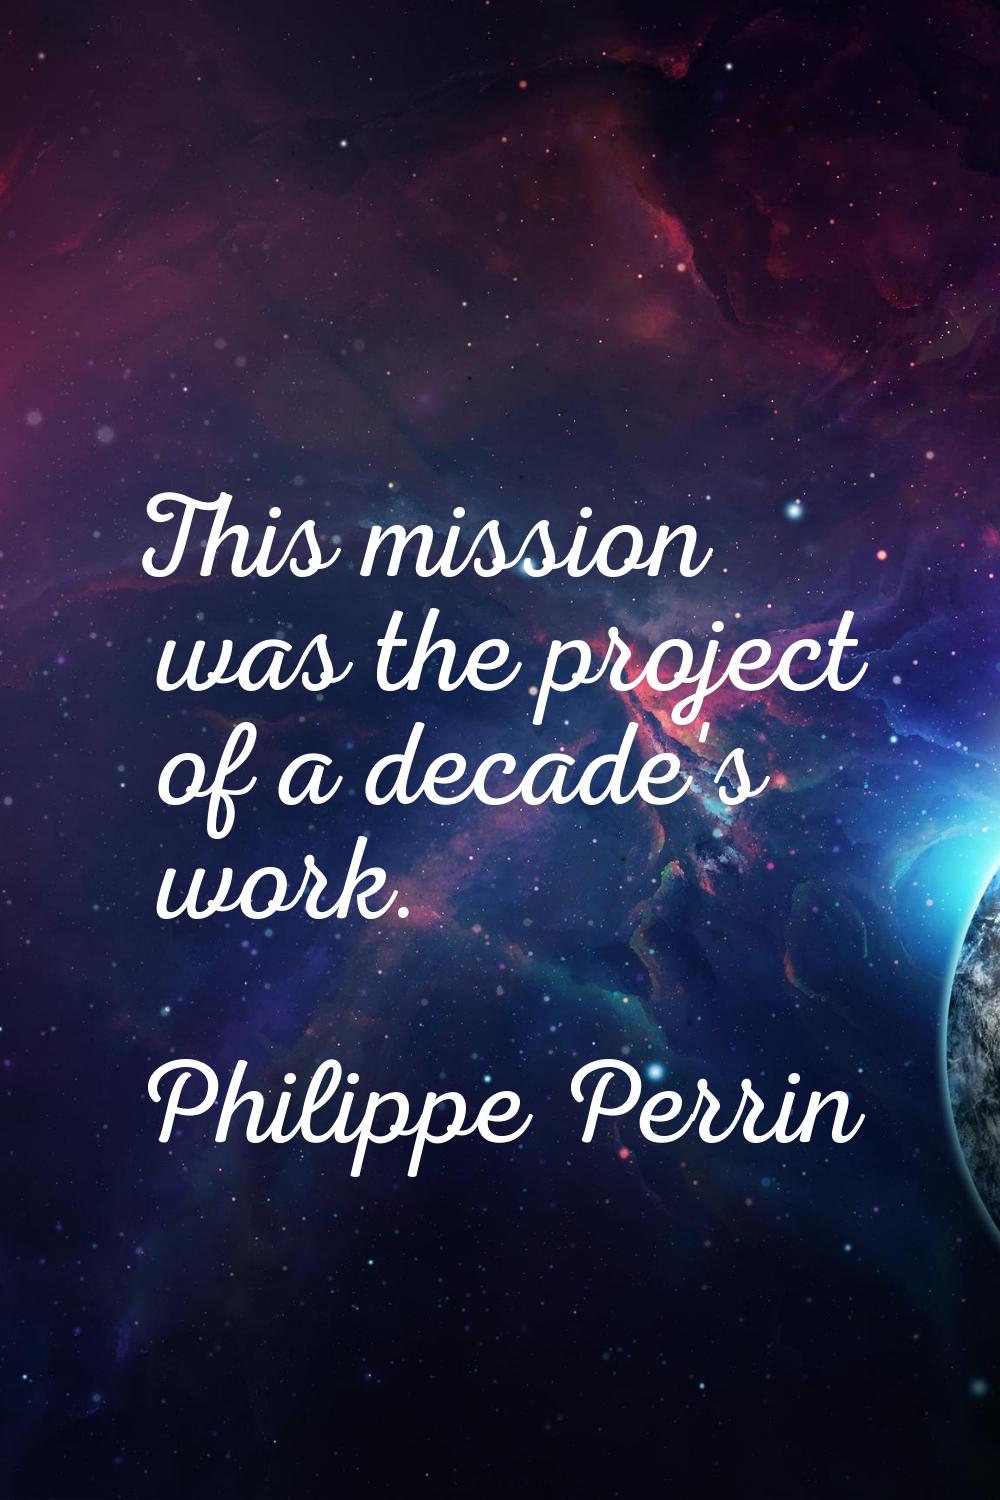 This mission was the project of a decade's work.